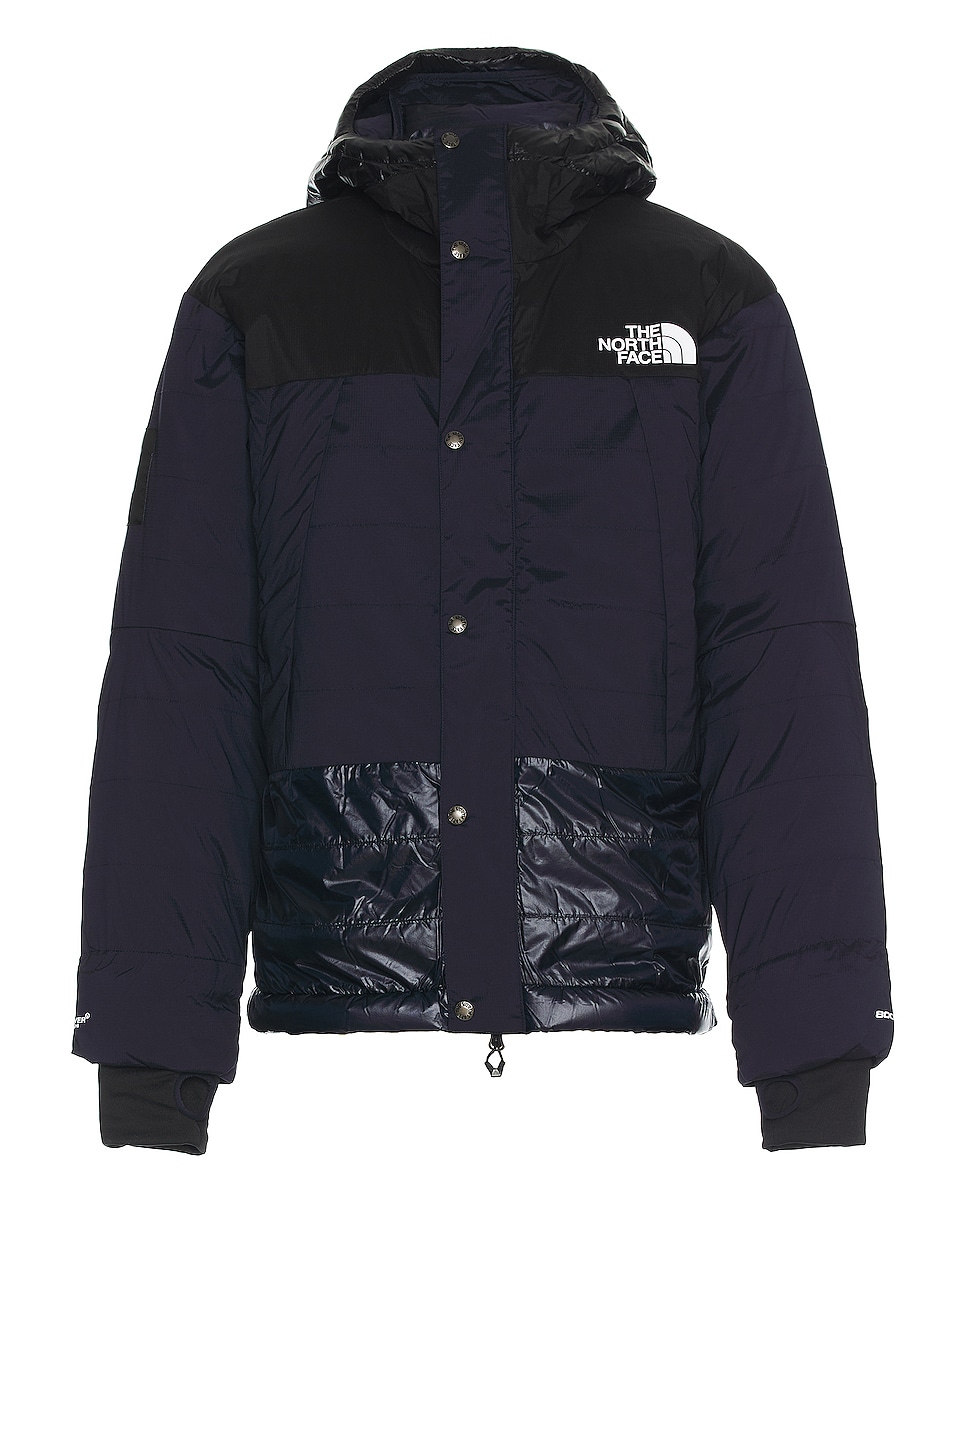 Image 1 of The North Face X Project U 50/50 Mountain Jacket in Tnf Black & Aviator Navy